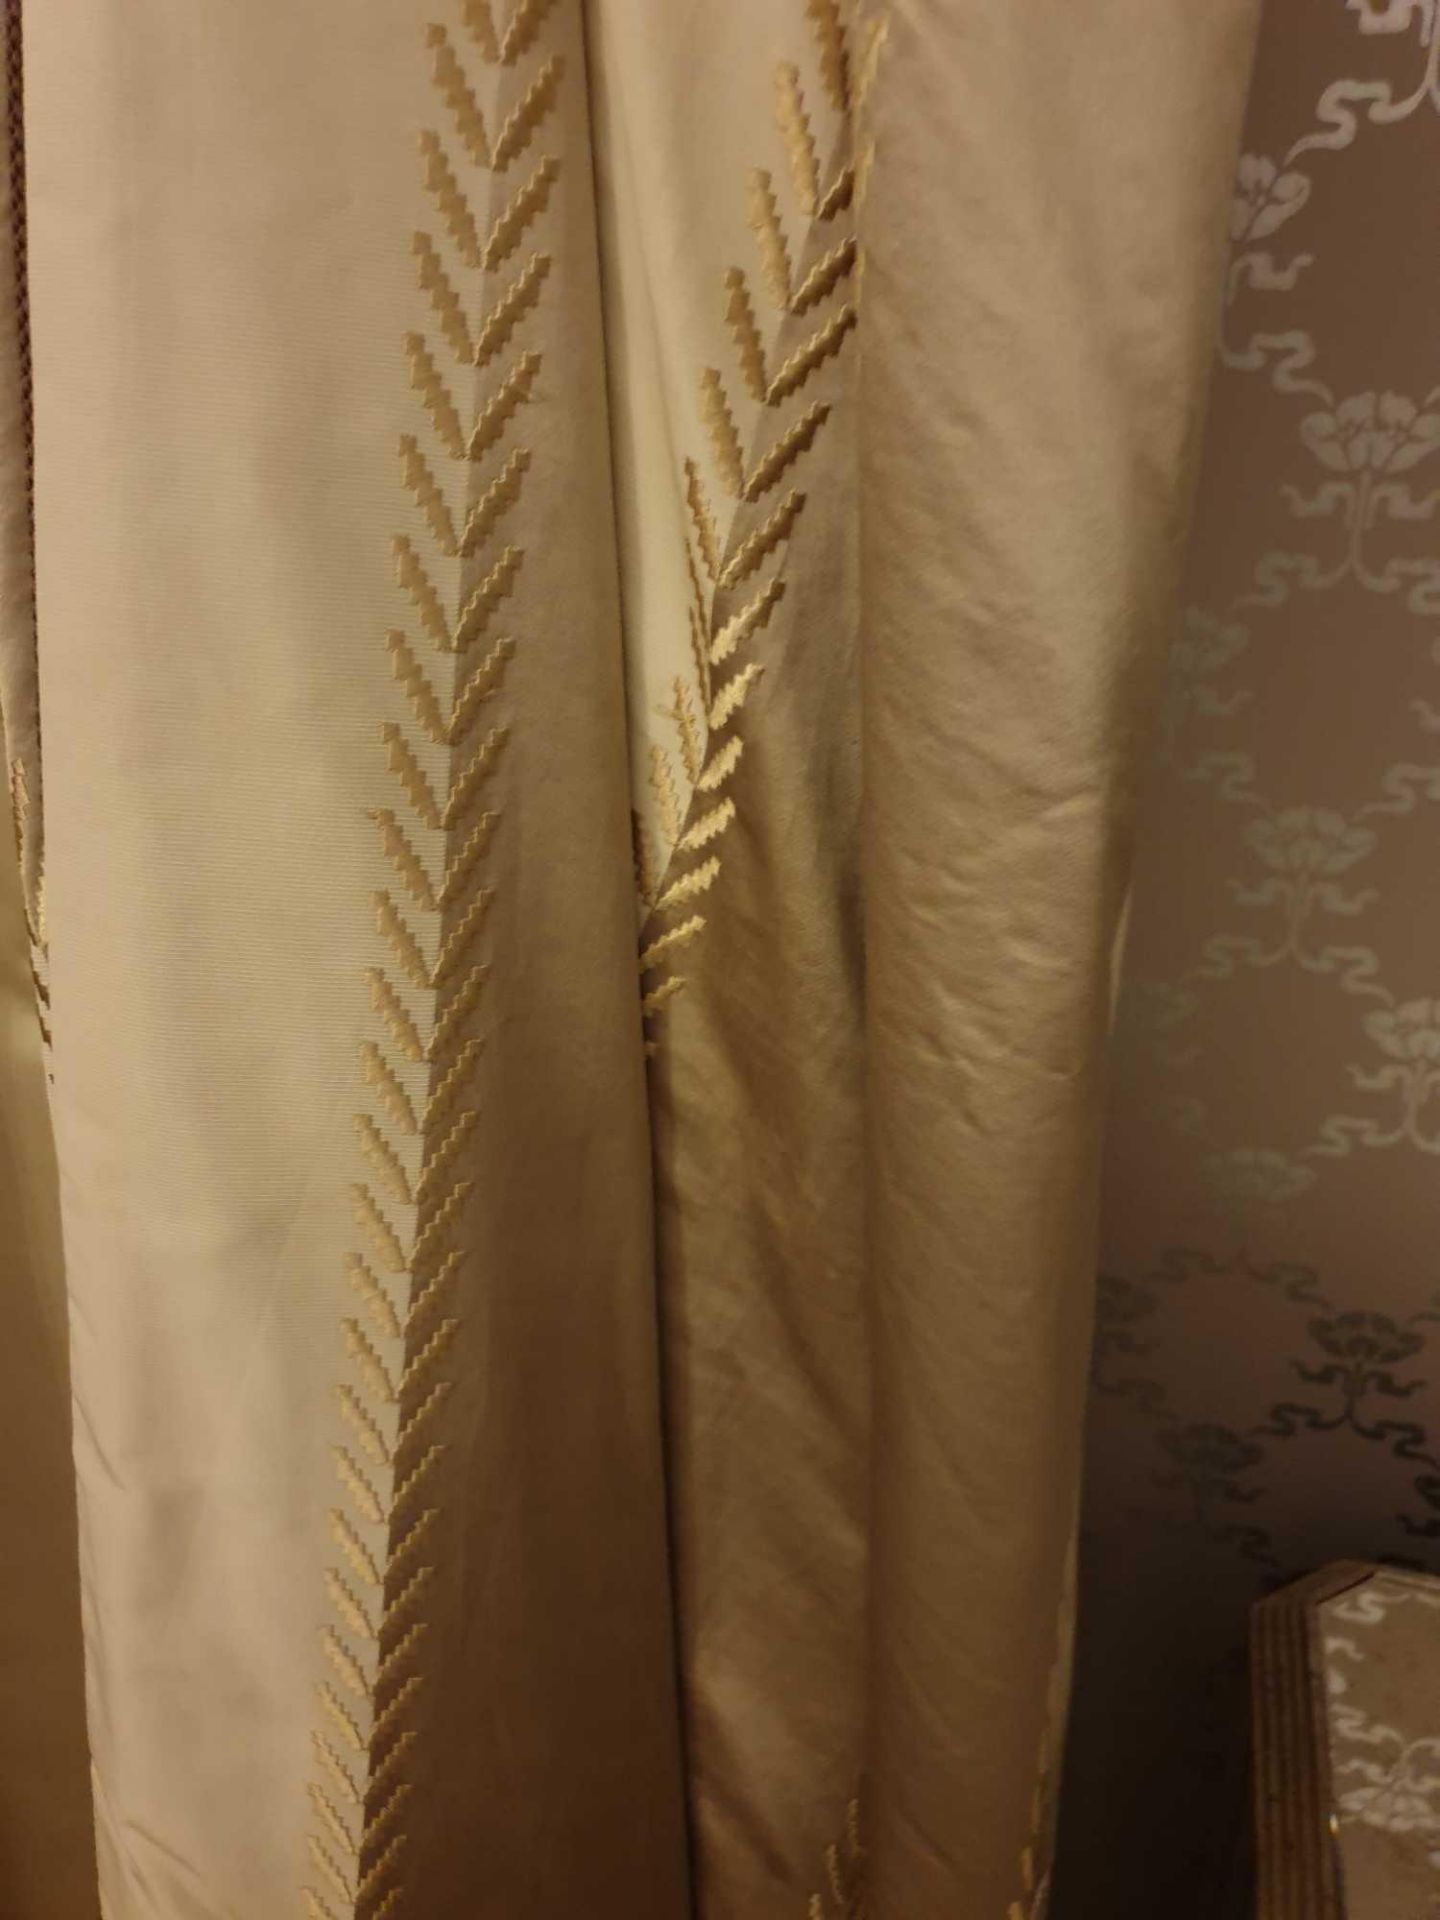 A Pair Of Silk Drapes And Jabots In Pale Gold And Dark Gold Large Stripes With Intermittent Gold - Image 3 of 3